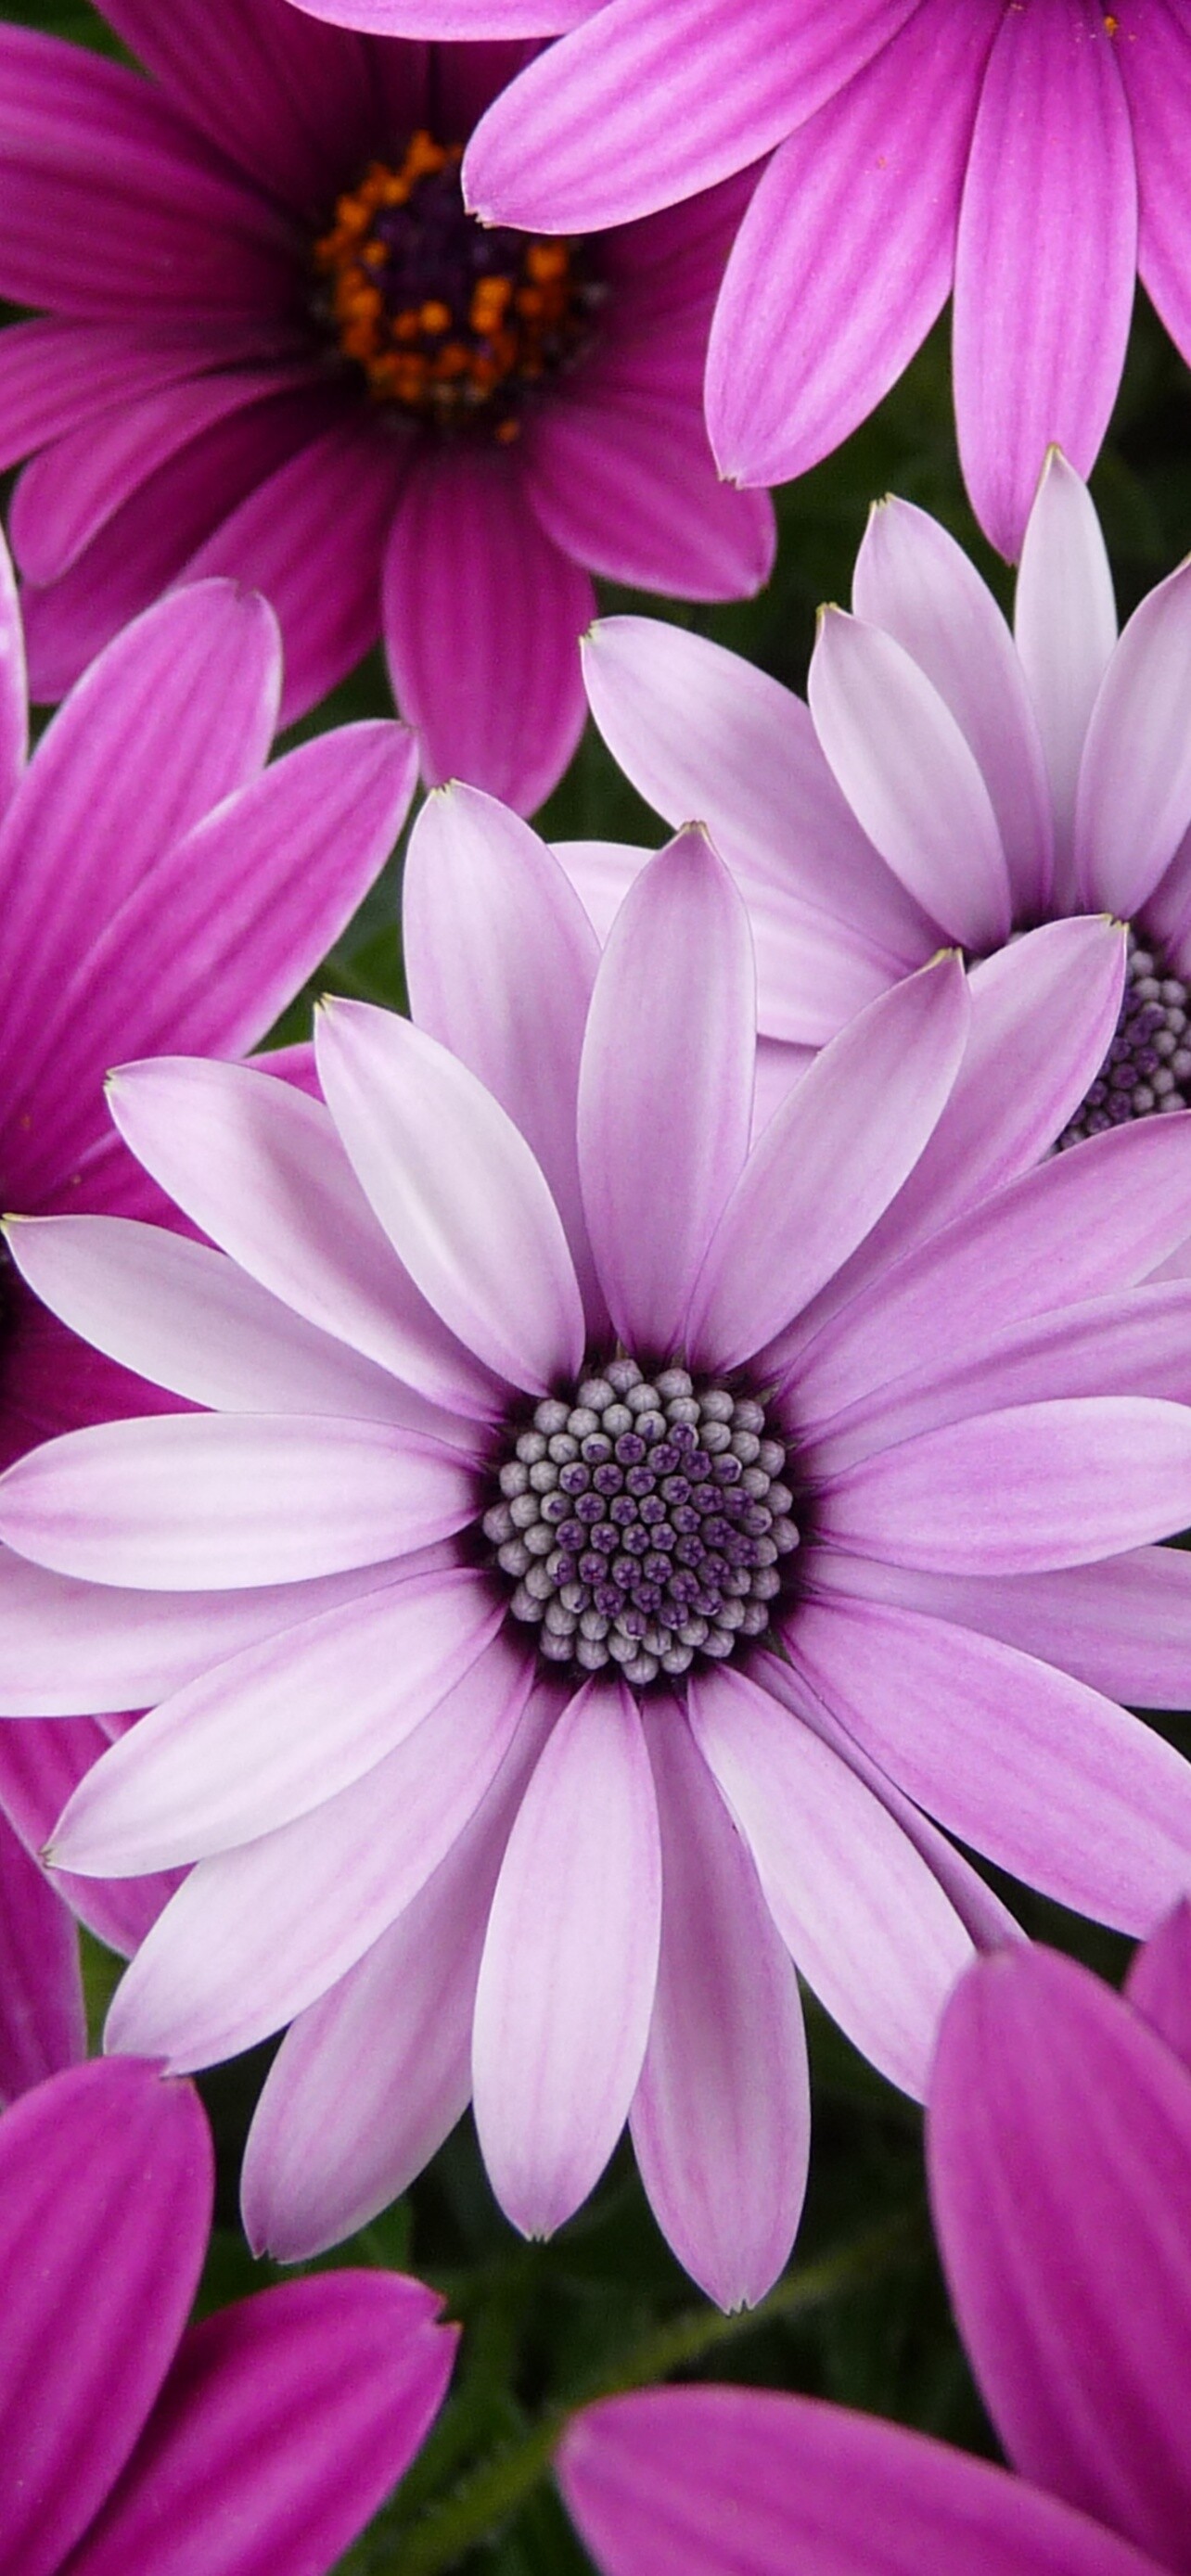 Daisy: This star-shaped flowering plant can be either annual or a perennial and comes in a variety of colors from bright white to the most electrifying shades of pinks, purples, and yellows. 1290x2780 HD Wallpaper.